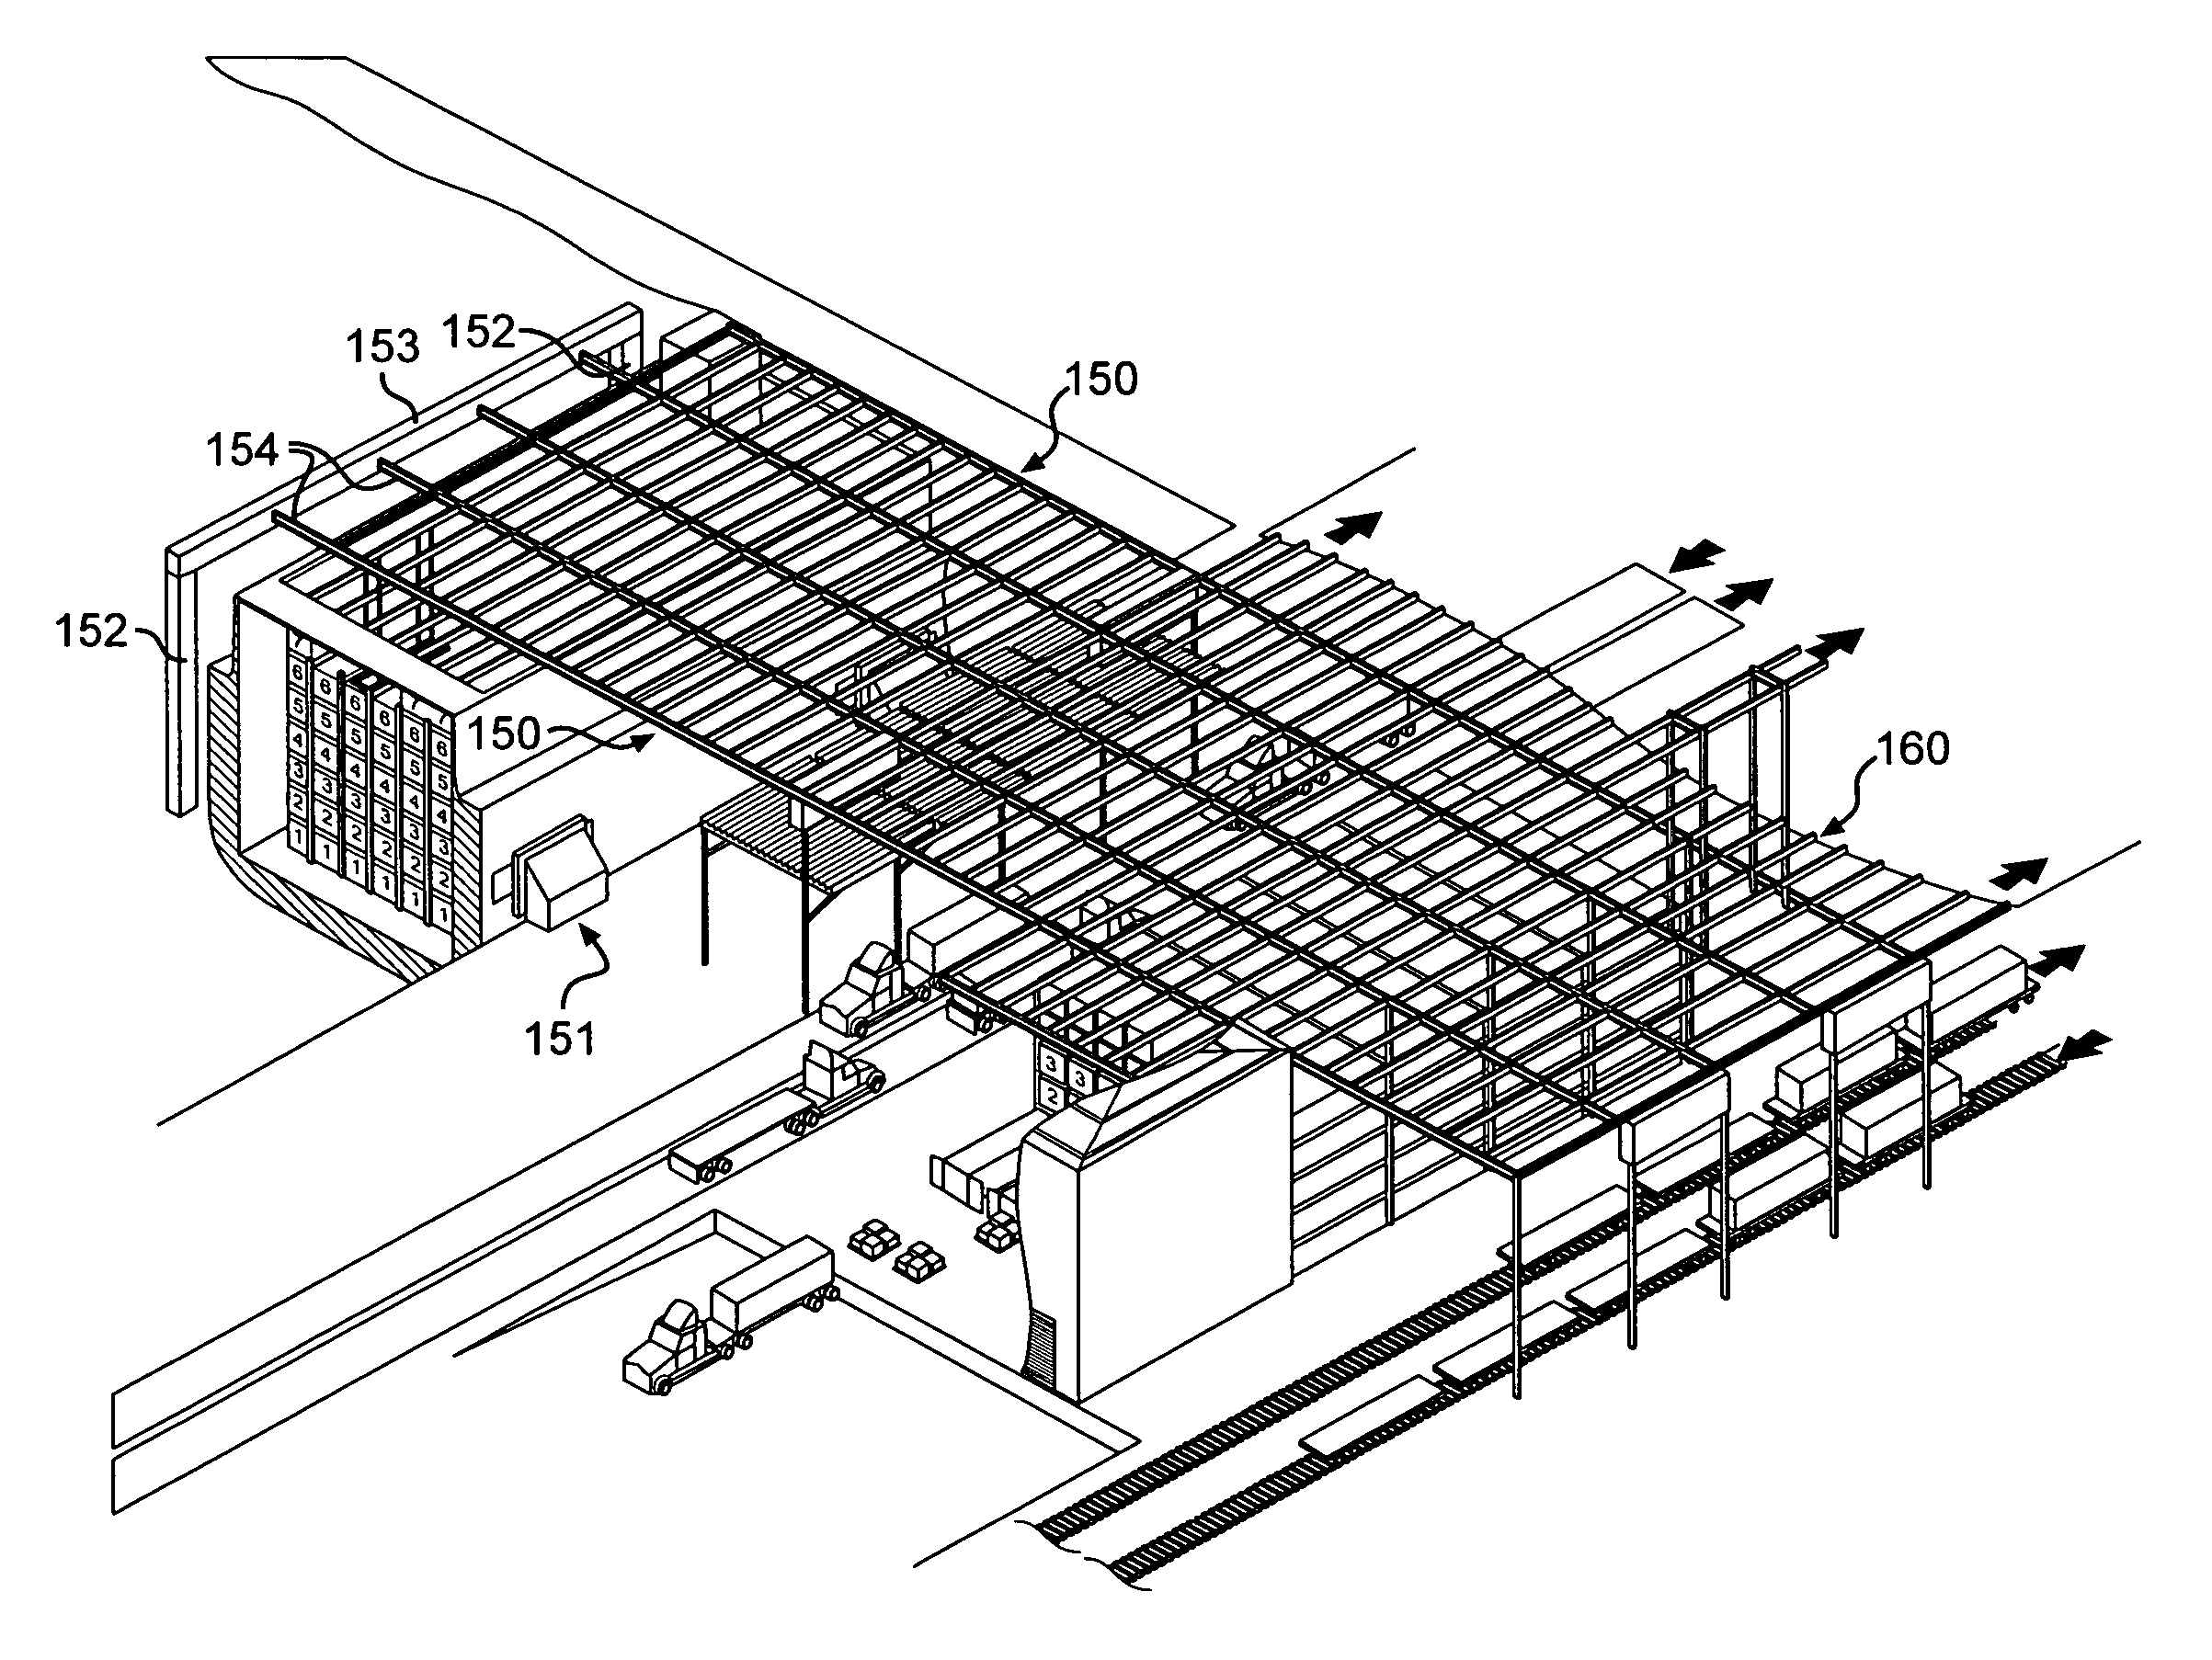 Port storage and distribution system for international shipping containers